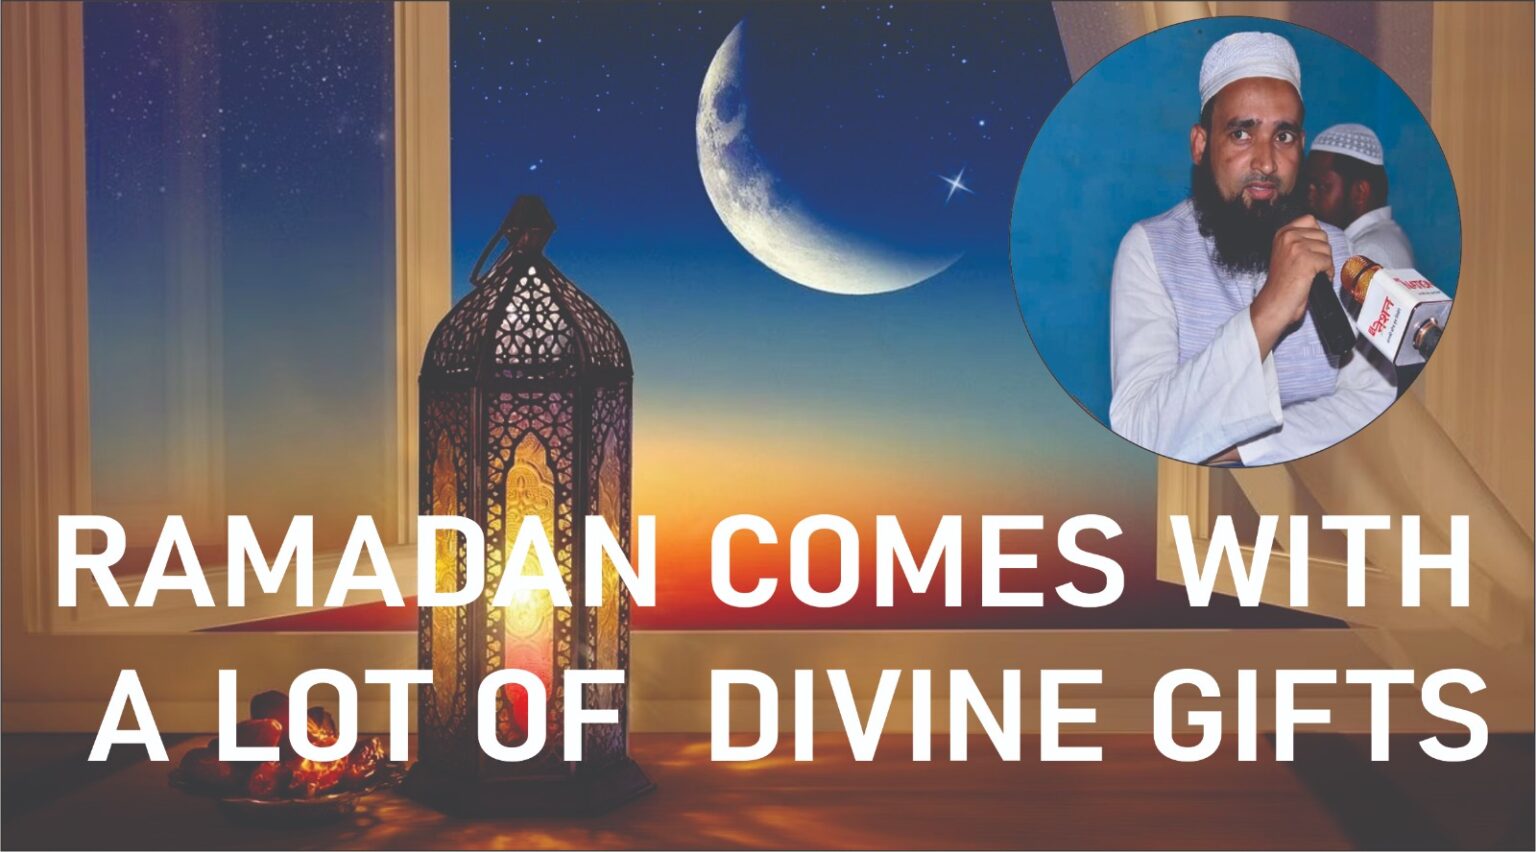 RAMADAN COMES WITH A LOT OF DIVINE GIFTS